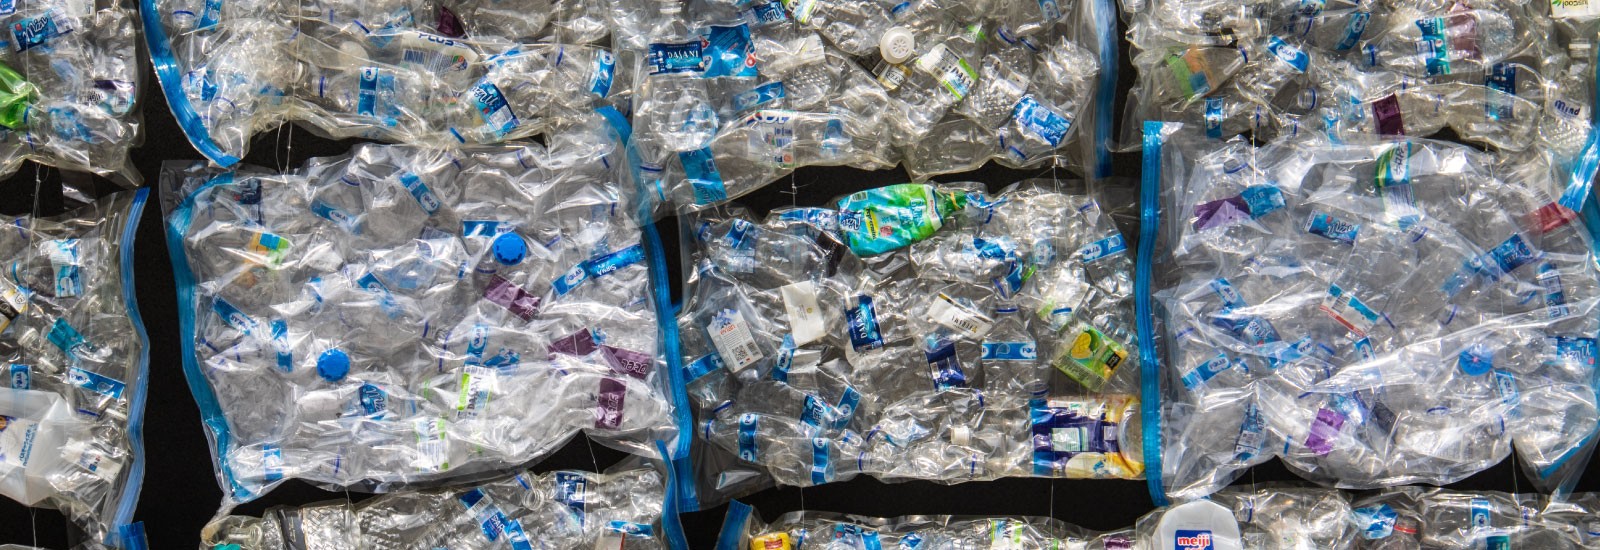 Plastic water bottles in the process of being recycled.